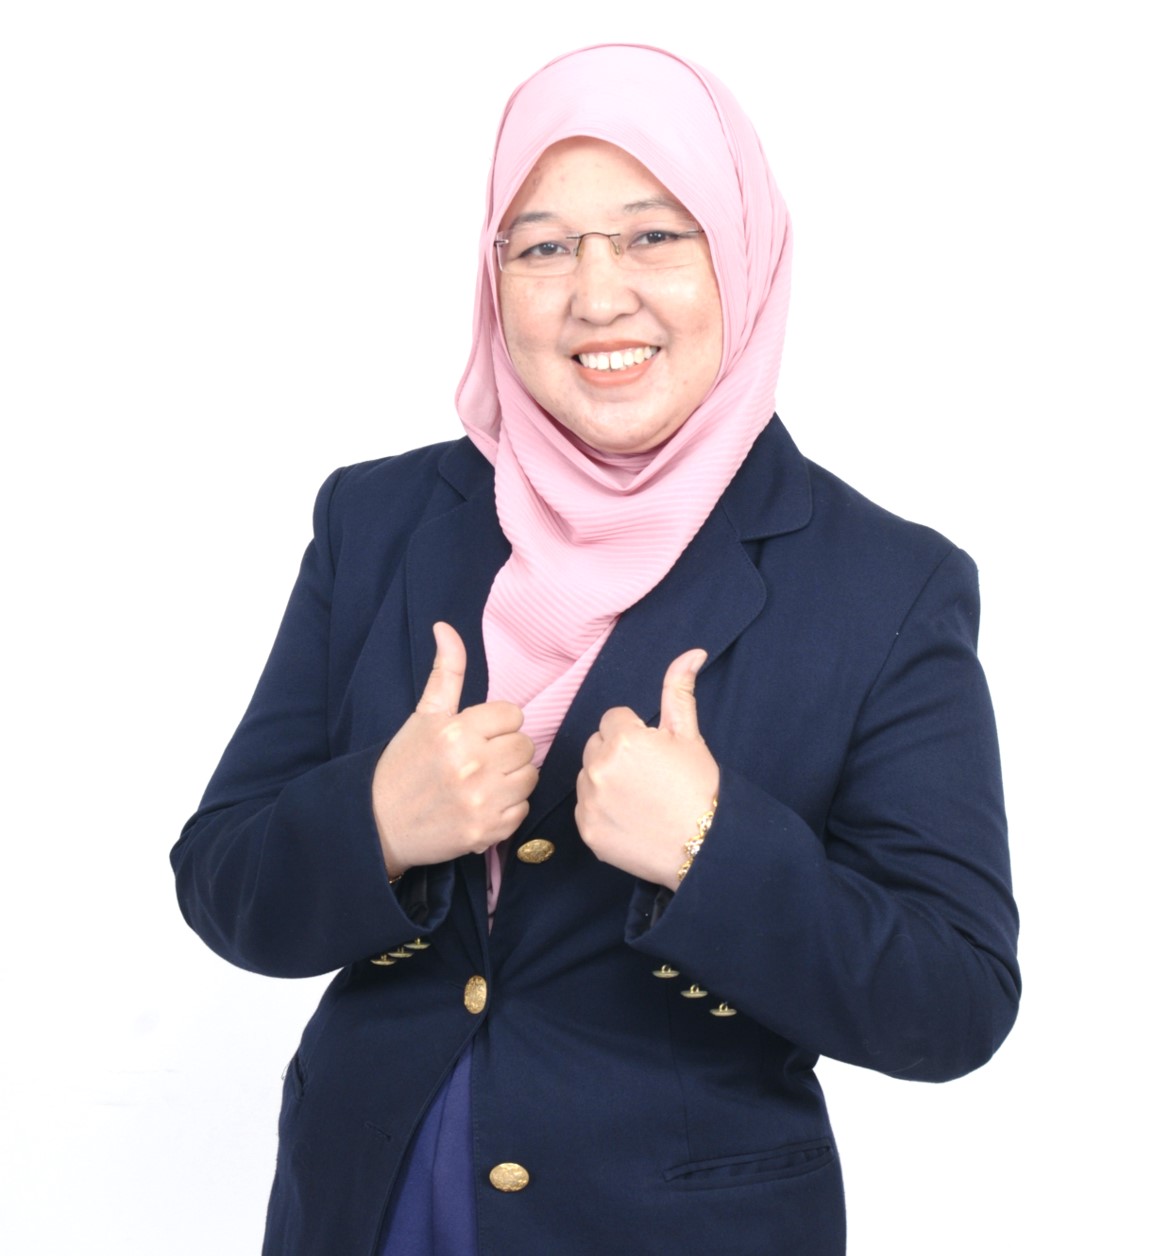 Assoc. Prof. Dr. Nor Farizal Mohammed